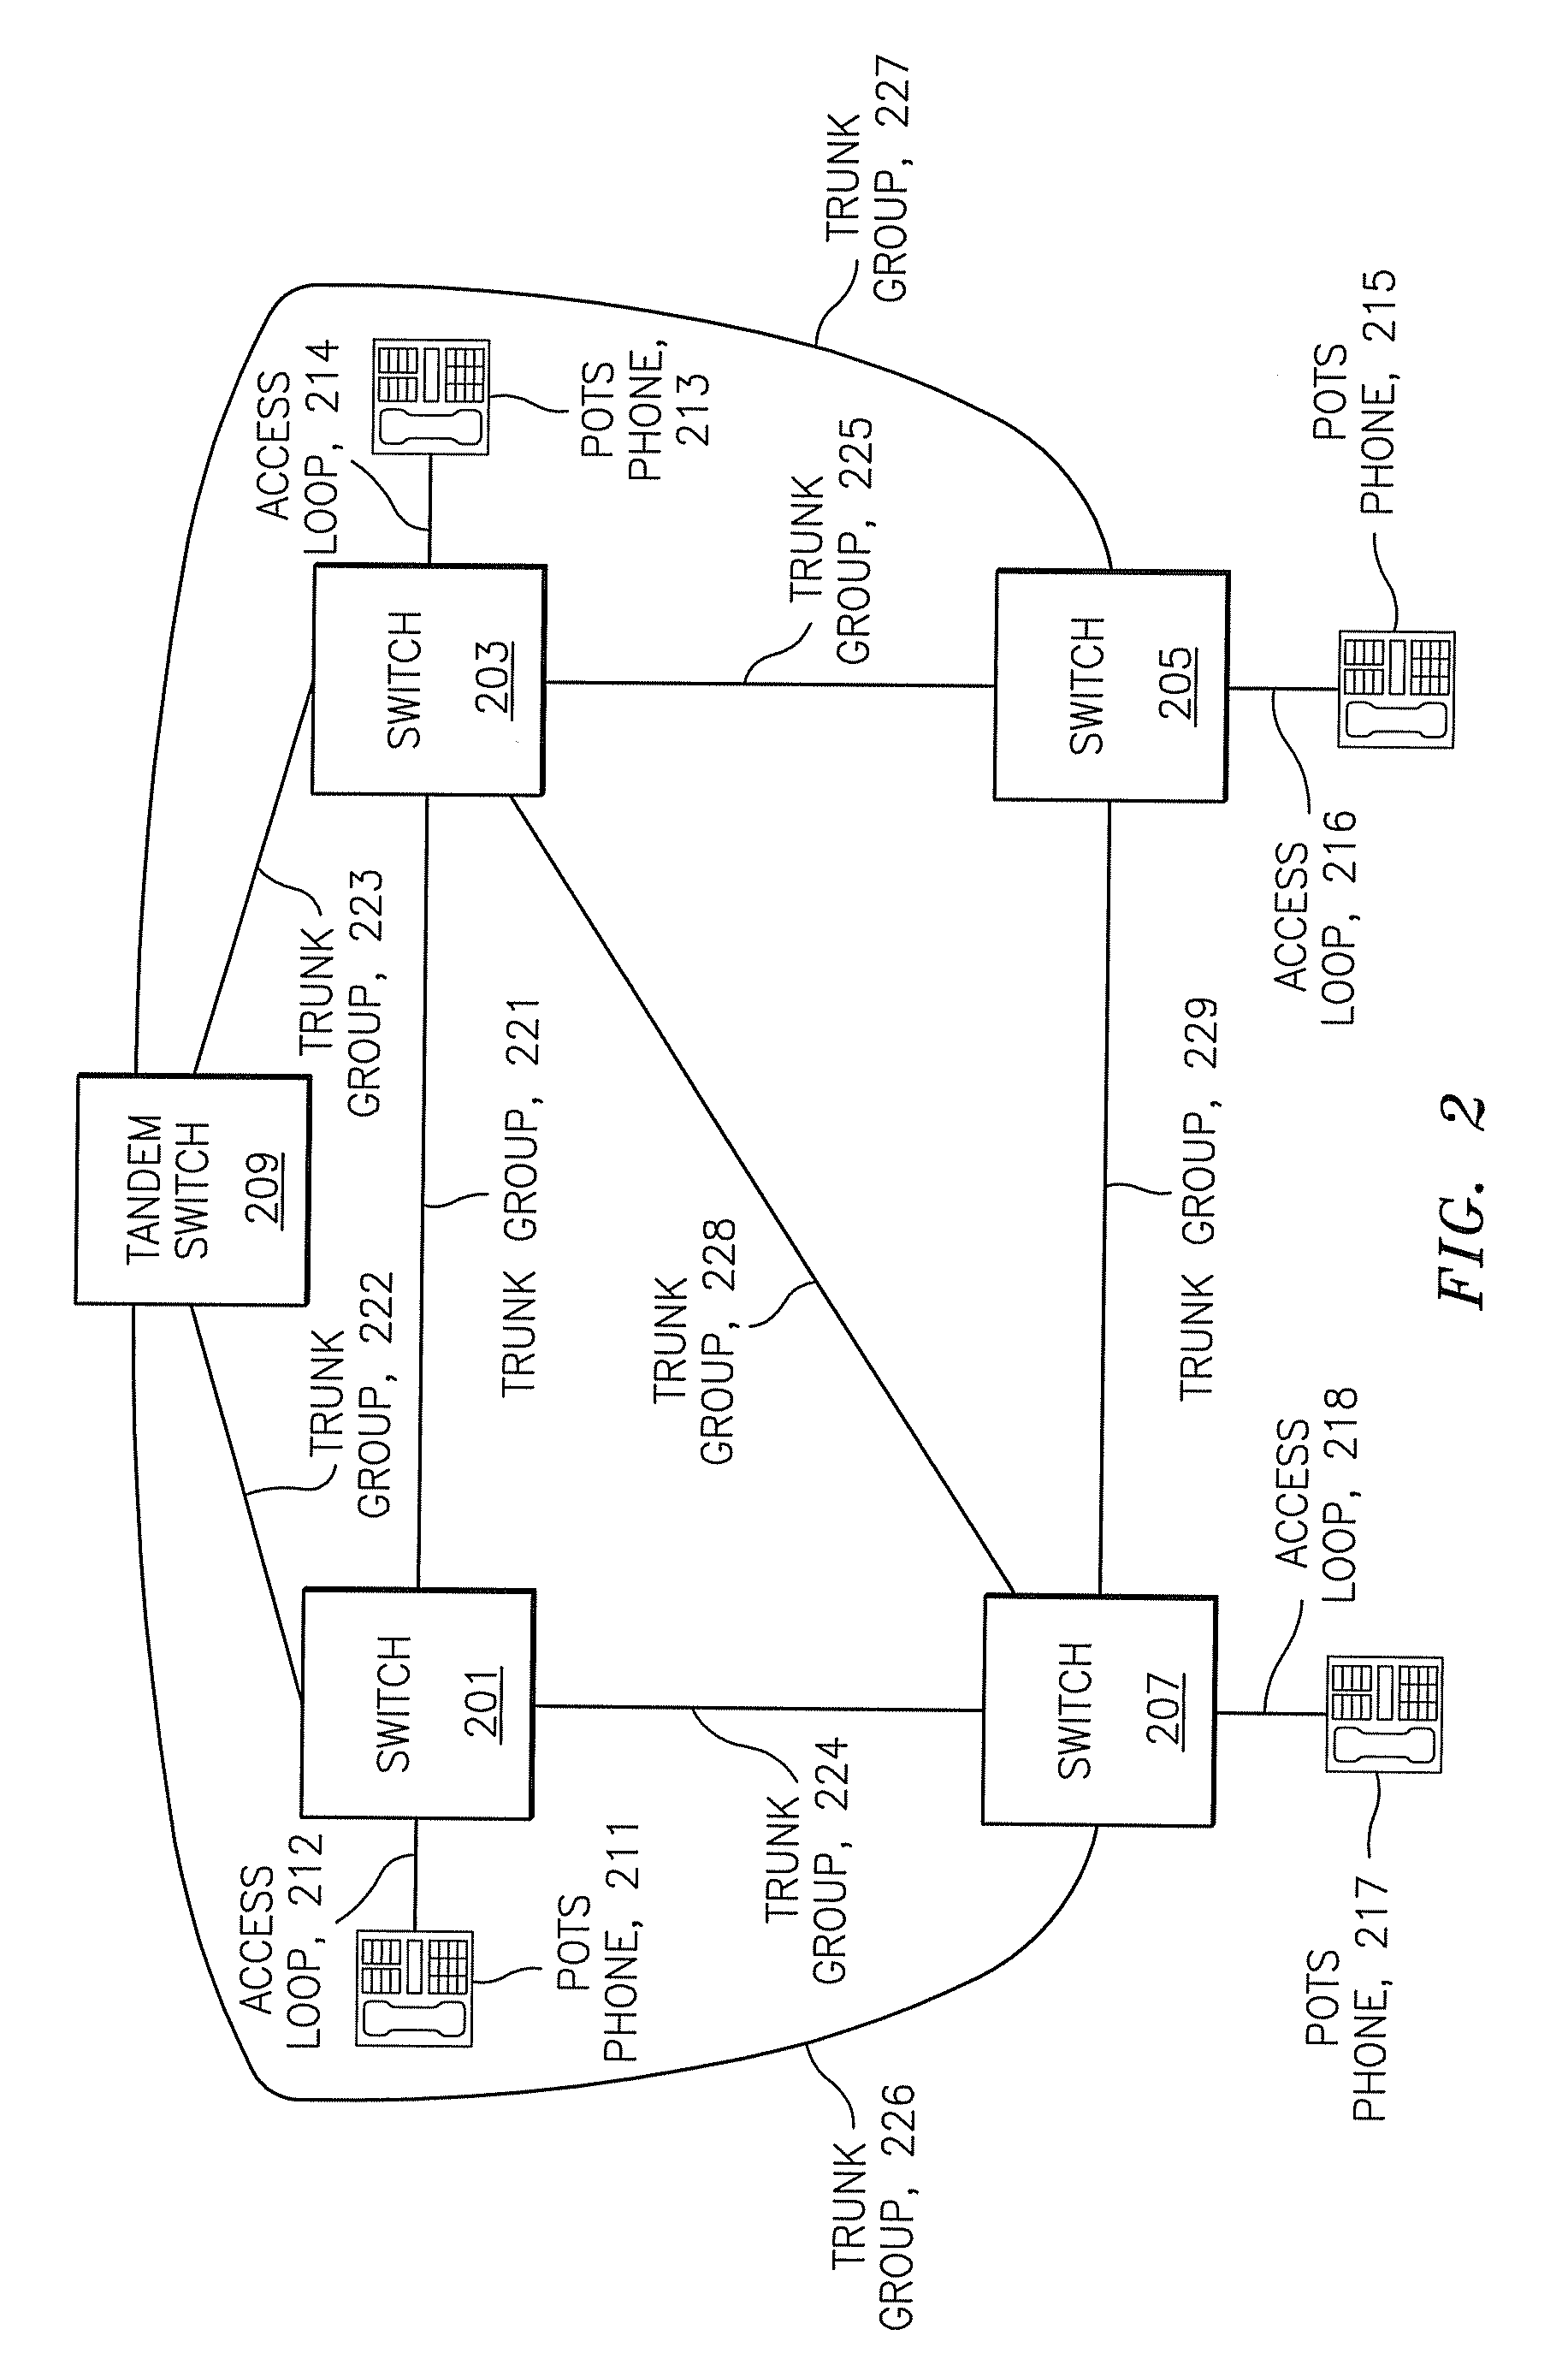 Methods, systems, and computer program products for automatic creation of data tables and elements